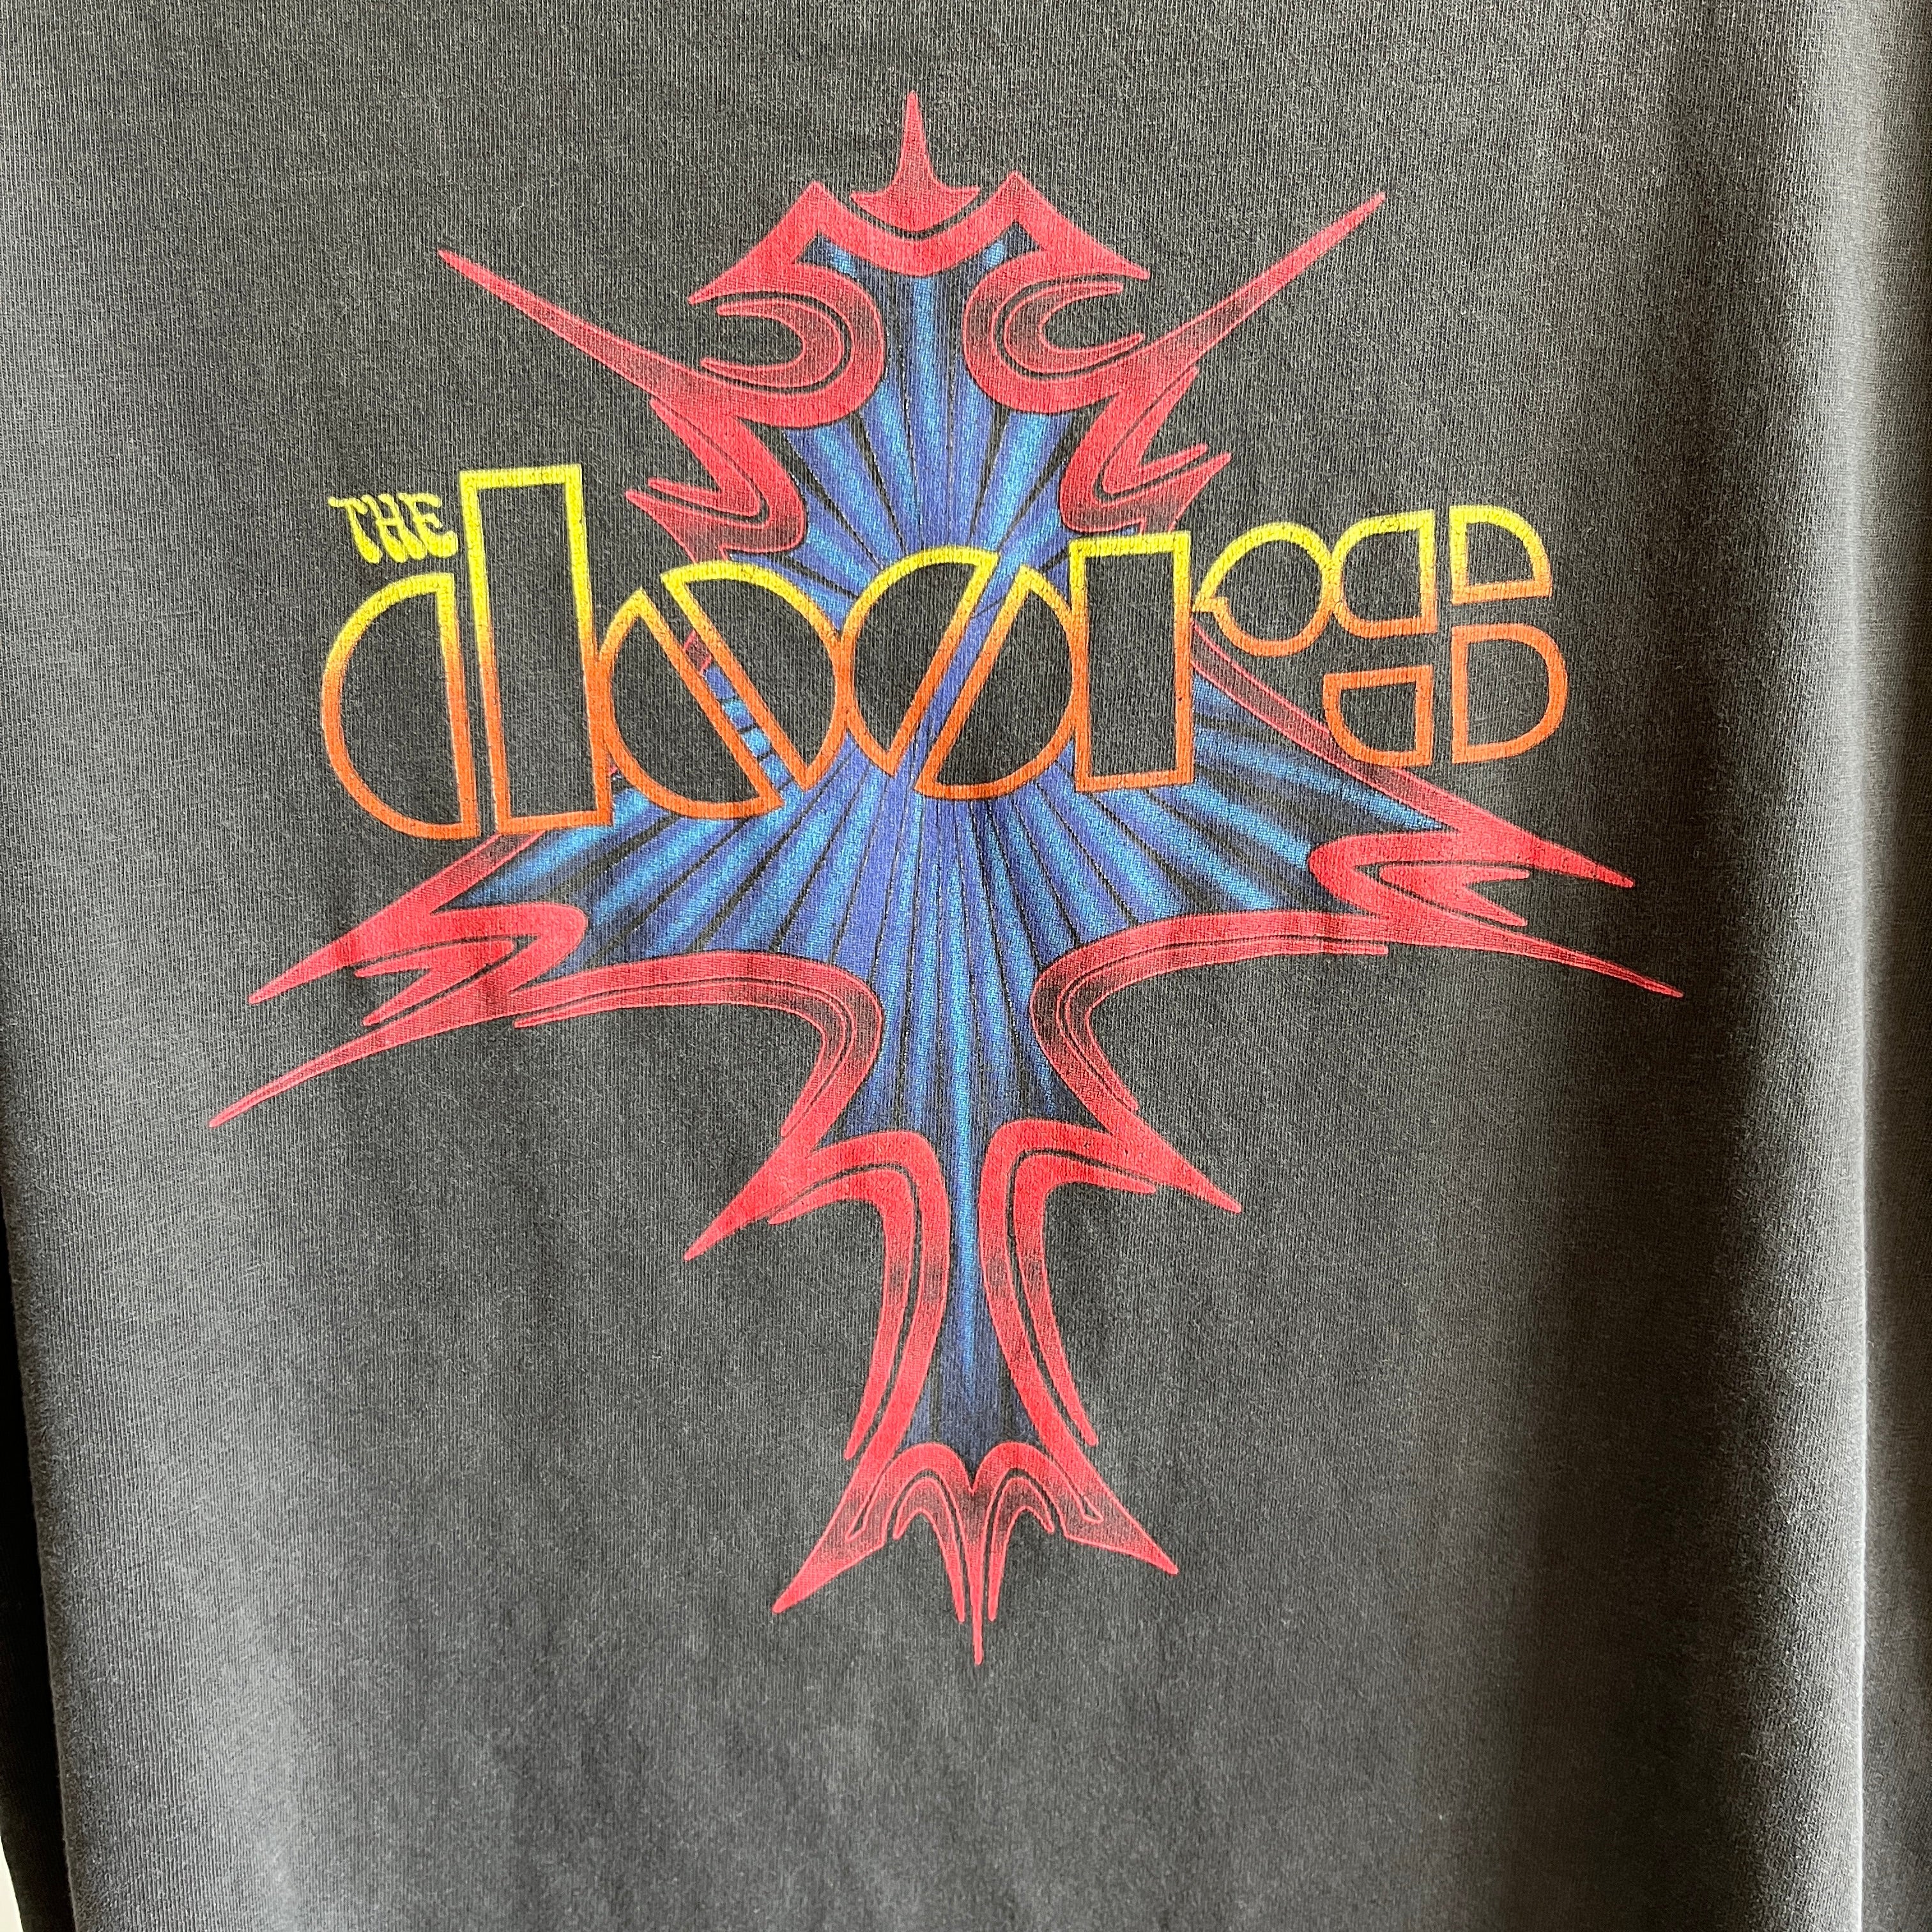 1995 The Doors Front and Back T-Shirt